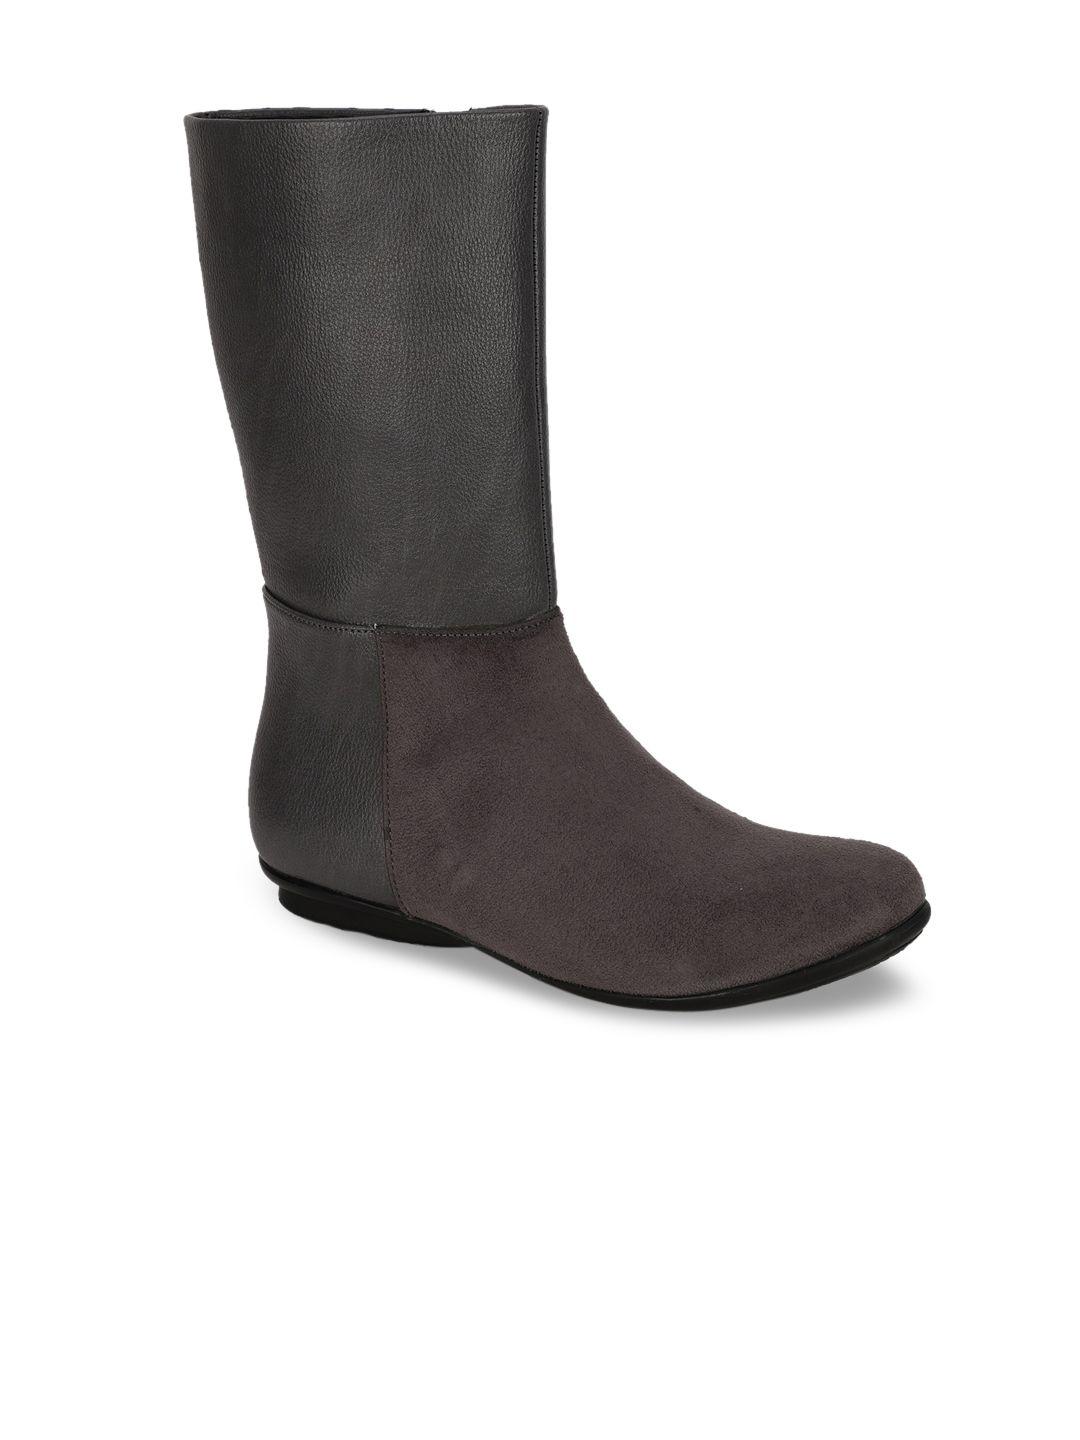 bruno manetti charcoal grey mid-top suede comfort heeled boots